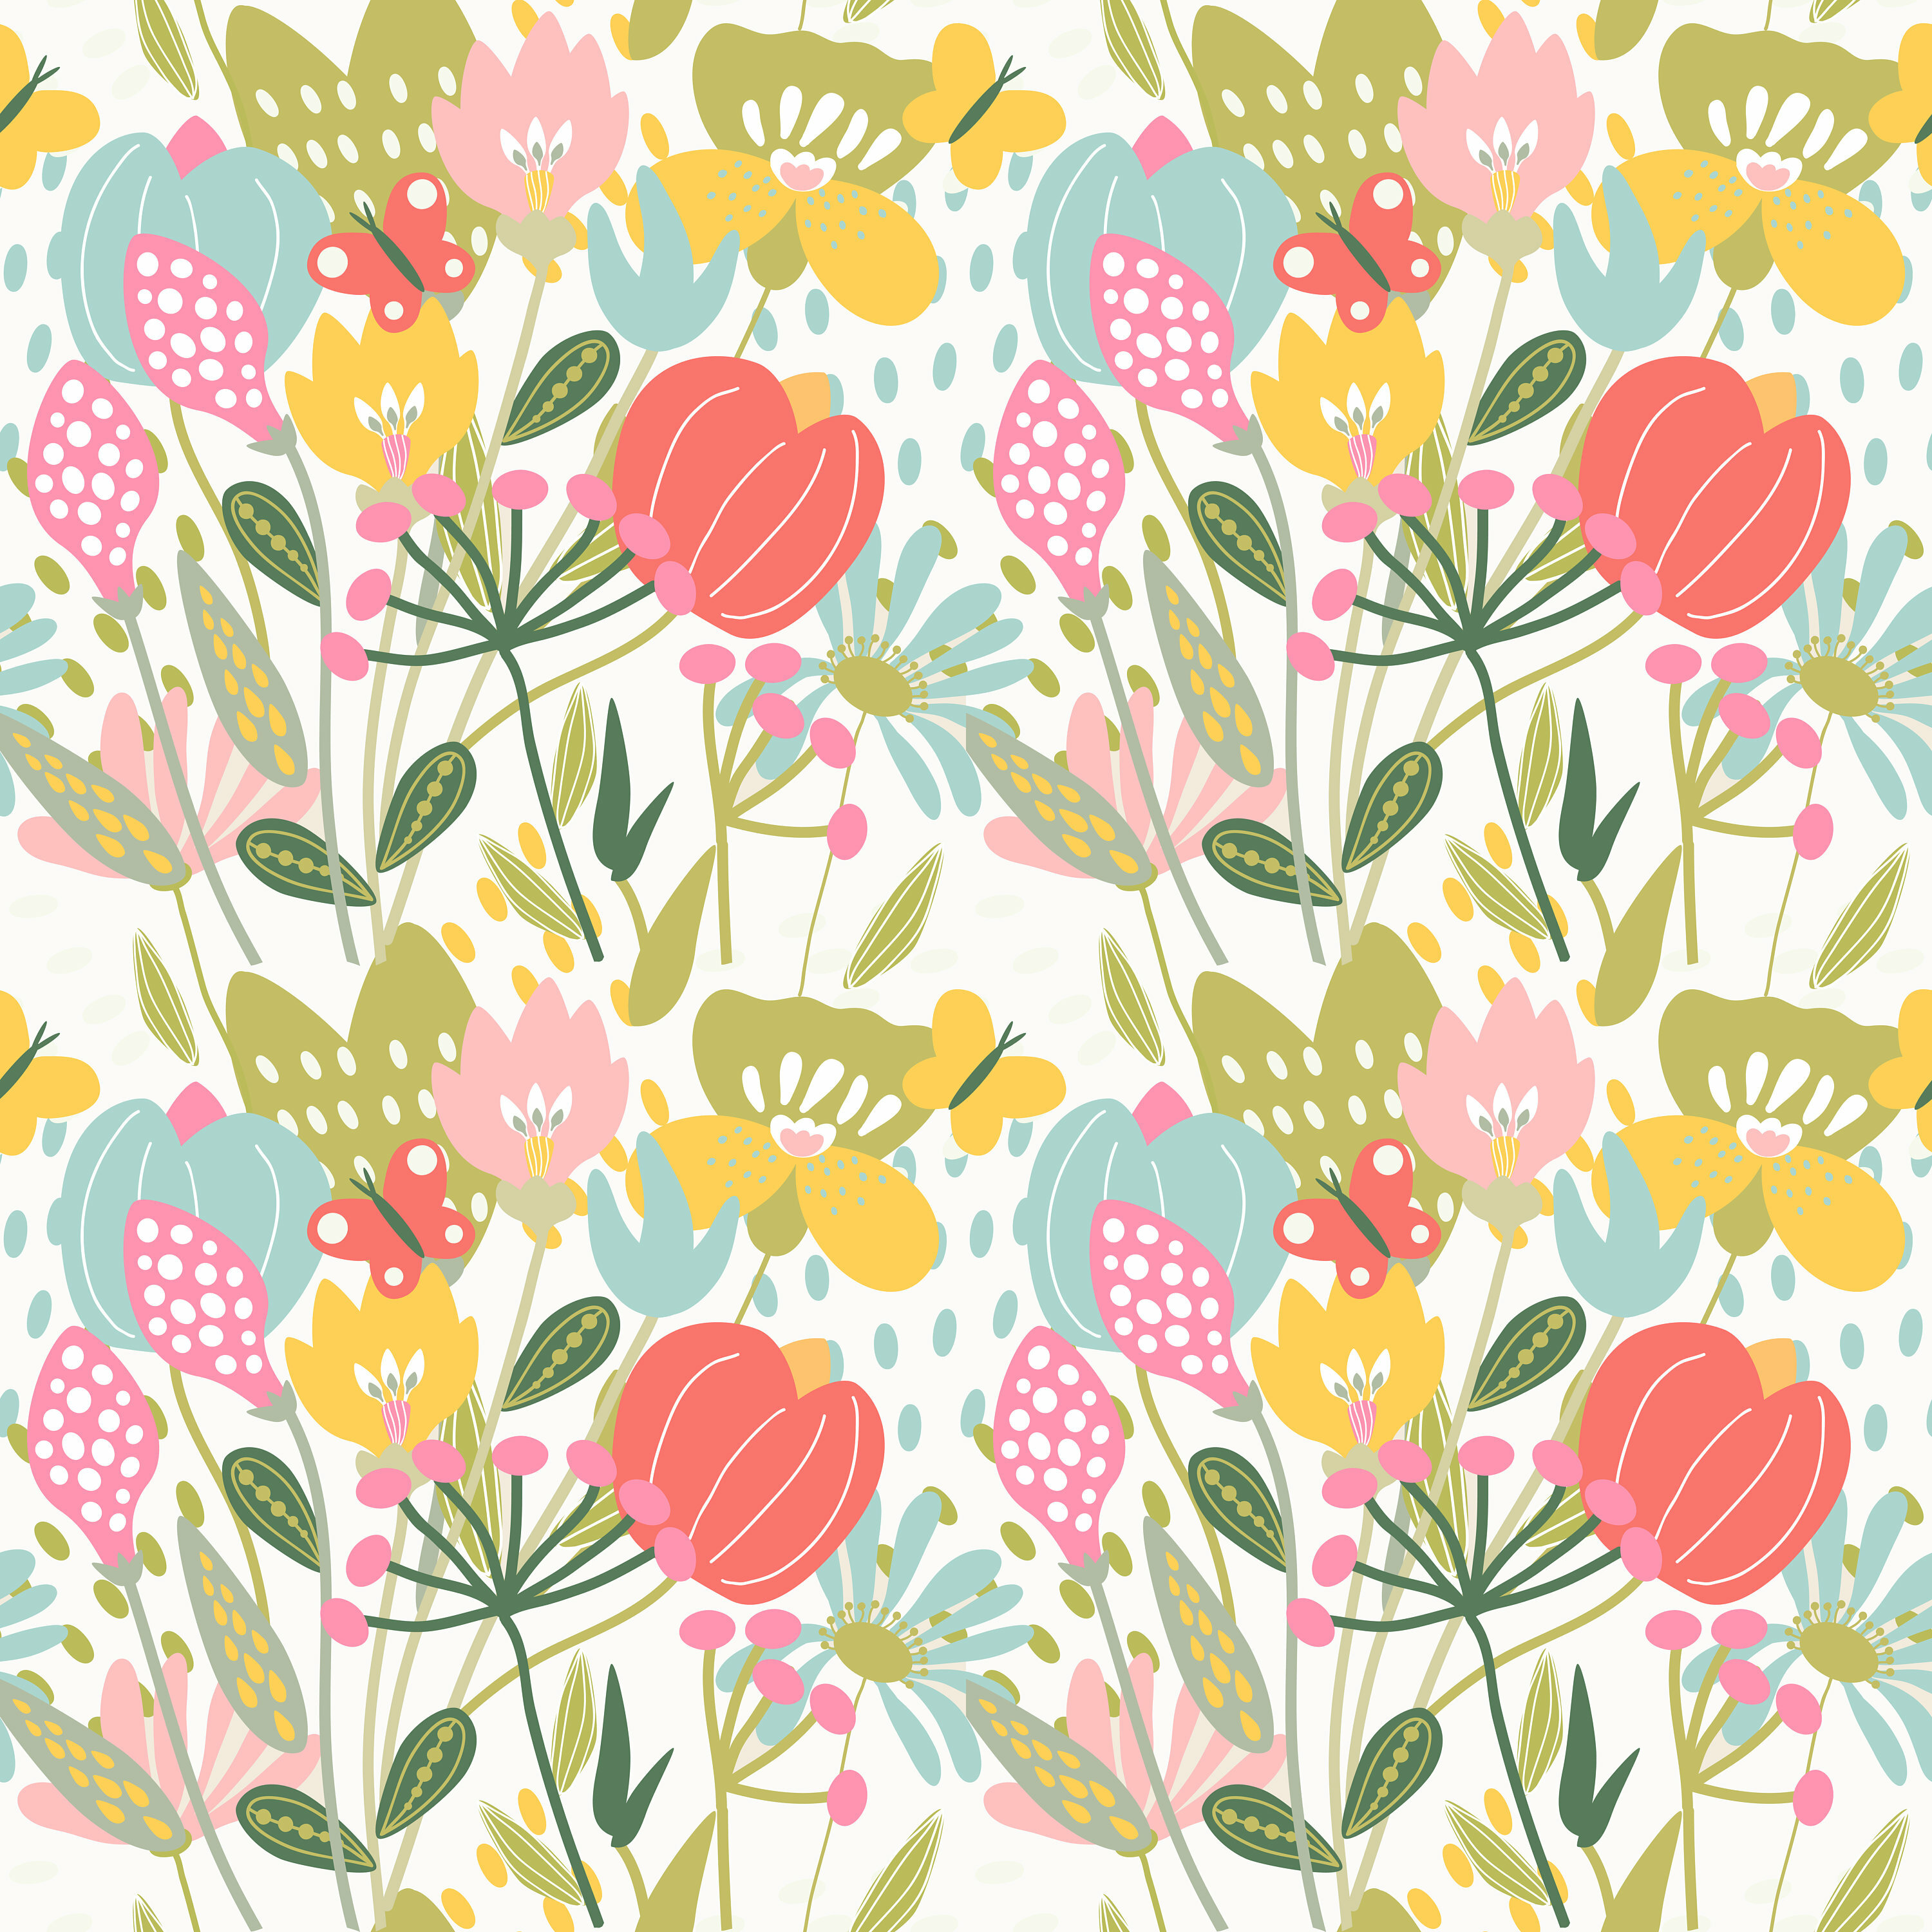 Spring Field Flowers Nature Removable wallpaper Floral Nursery Peel and stick